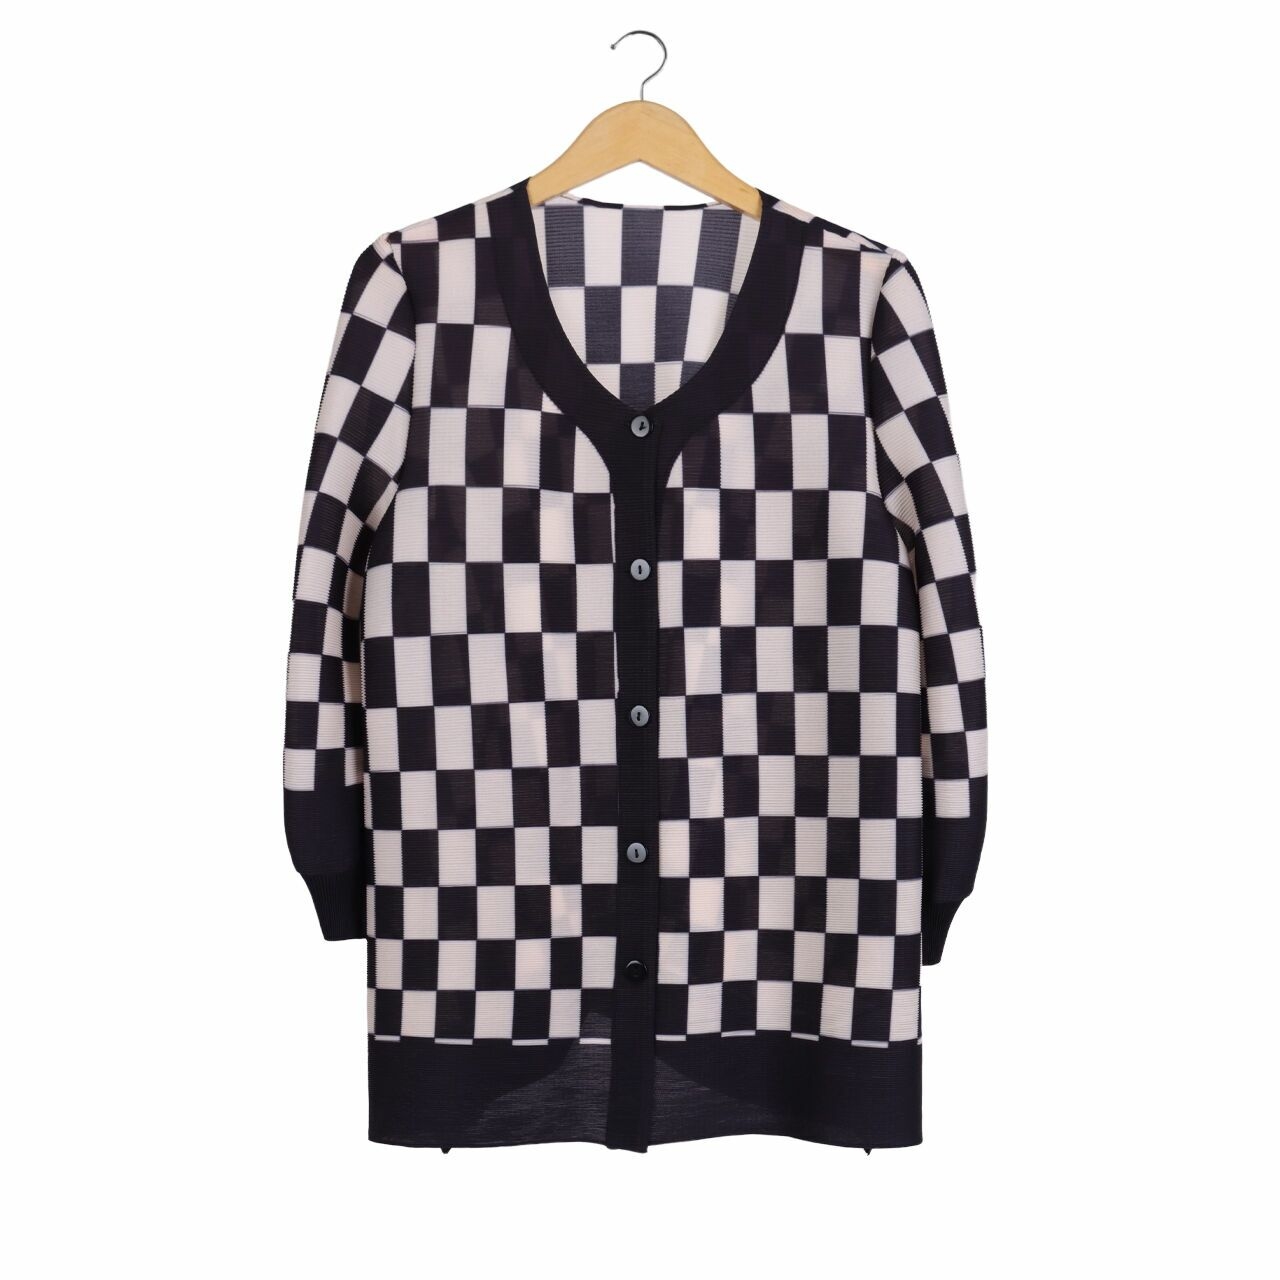 Orgeo Official Black & Cream Checkerboard Blouse